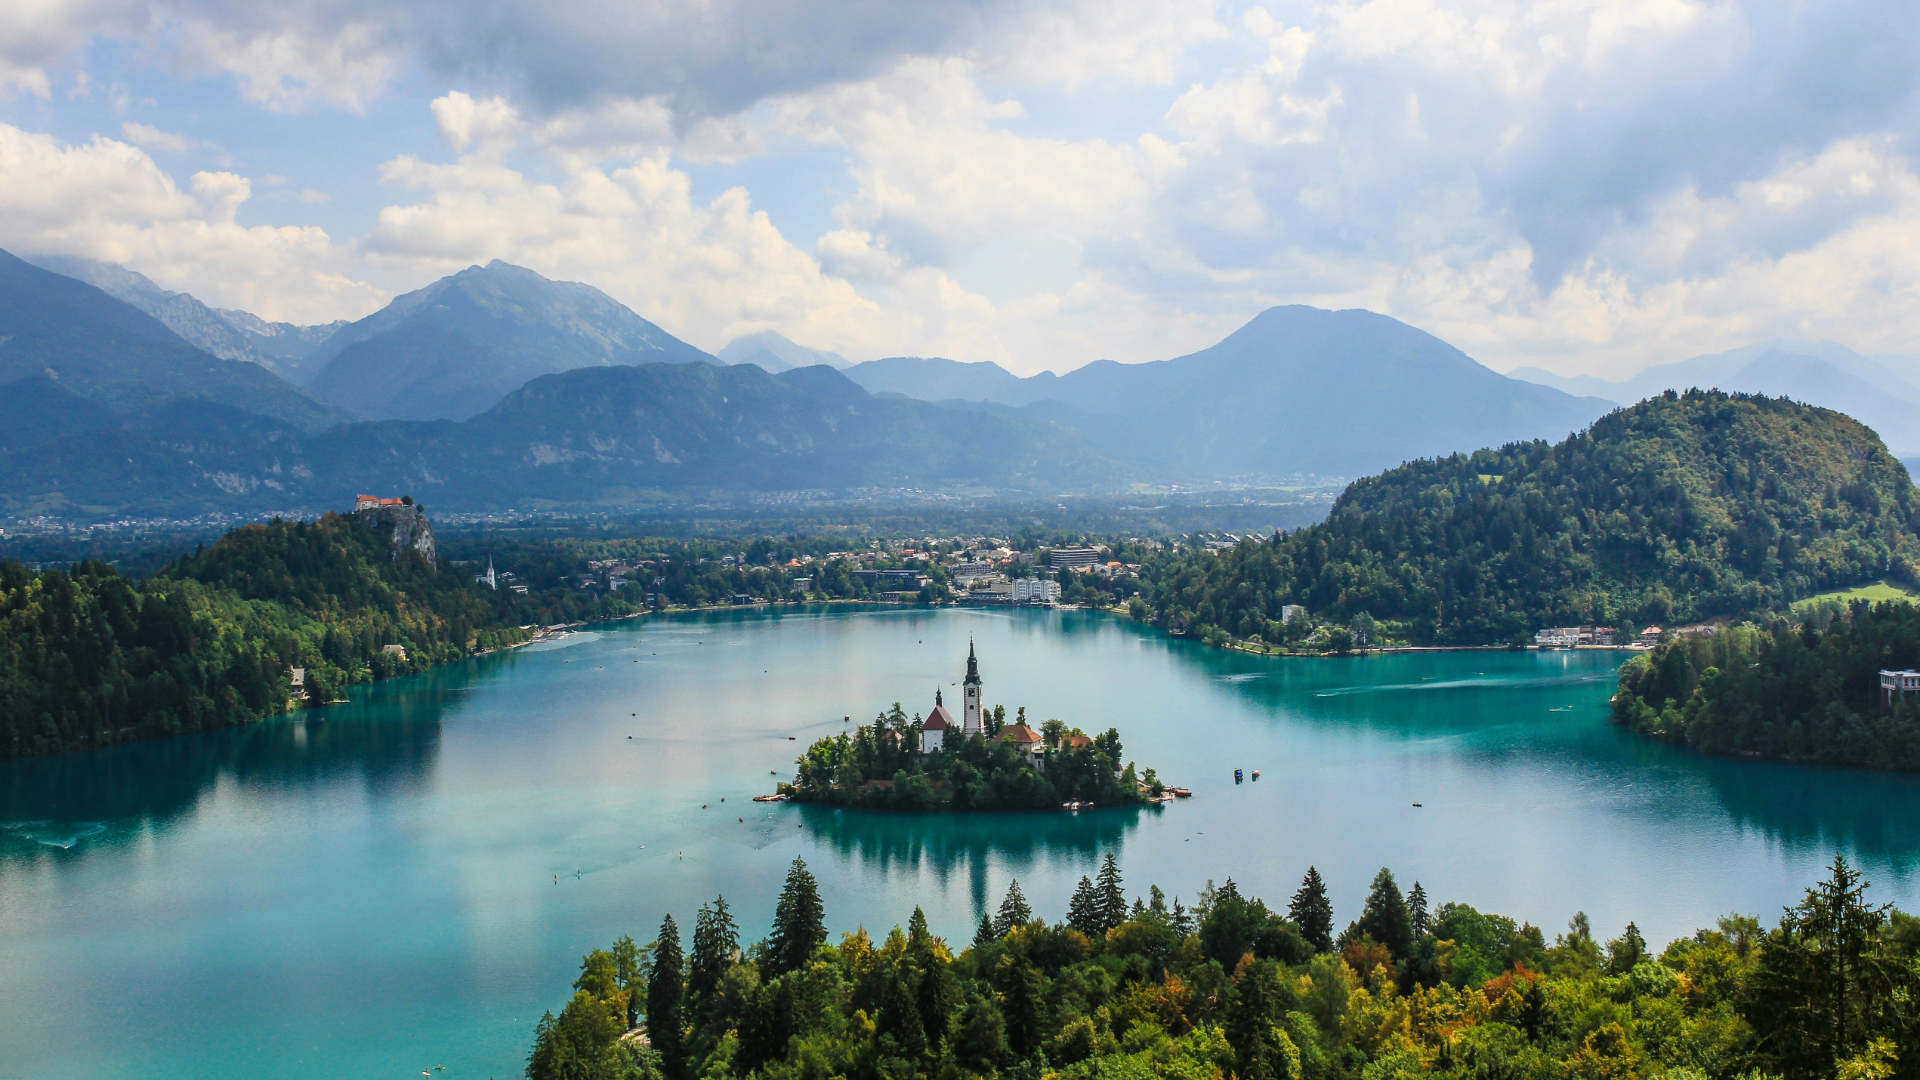 General 1920x1080 lake mountains water clouds sky trees forest tourist aerial view church Europe Lake Bled Slovenia nature